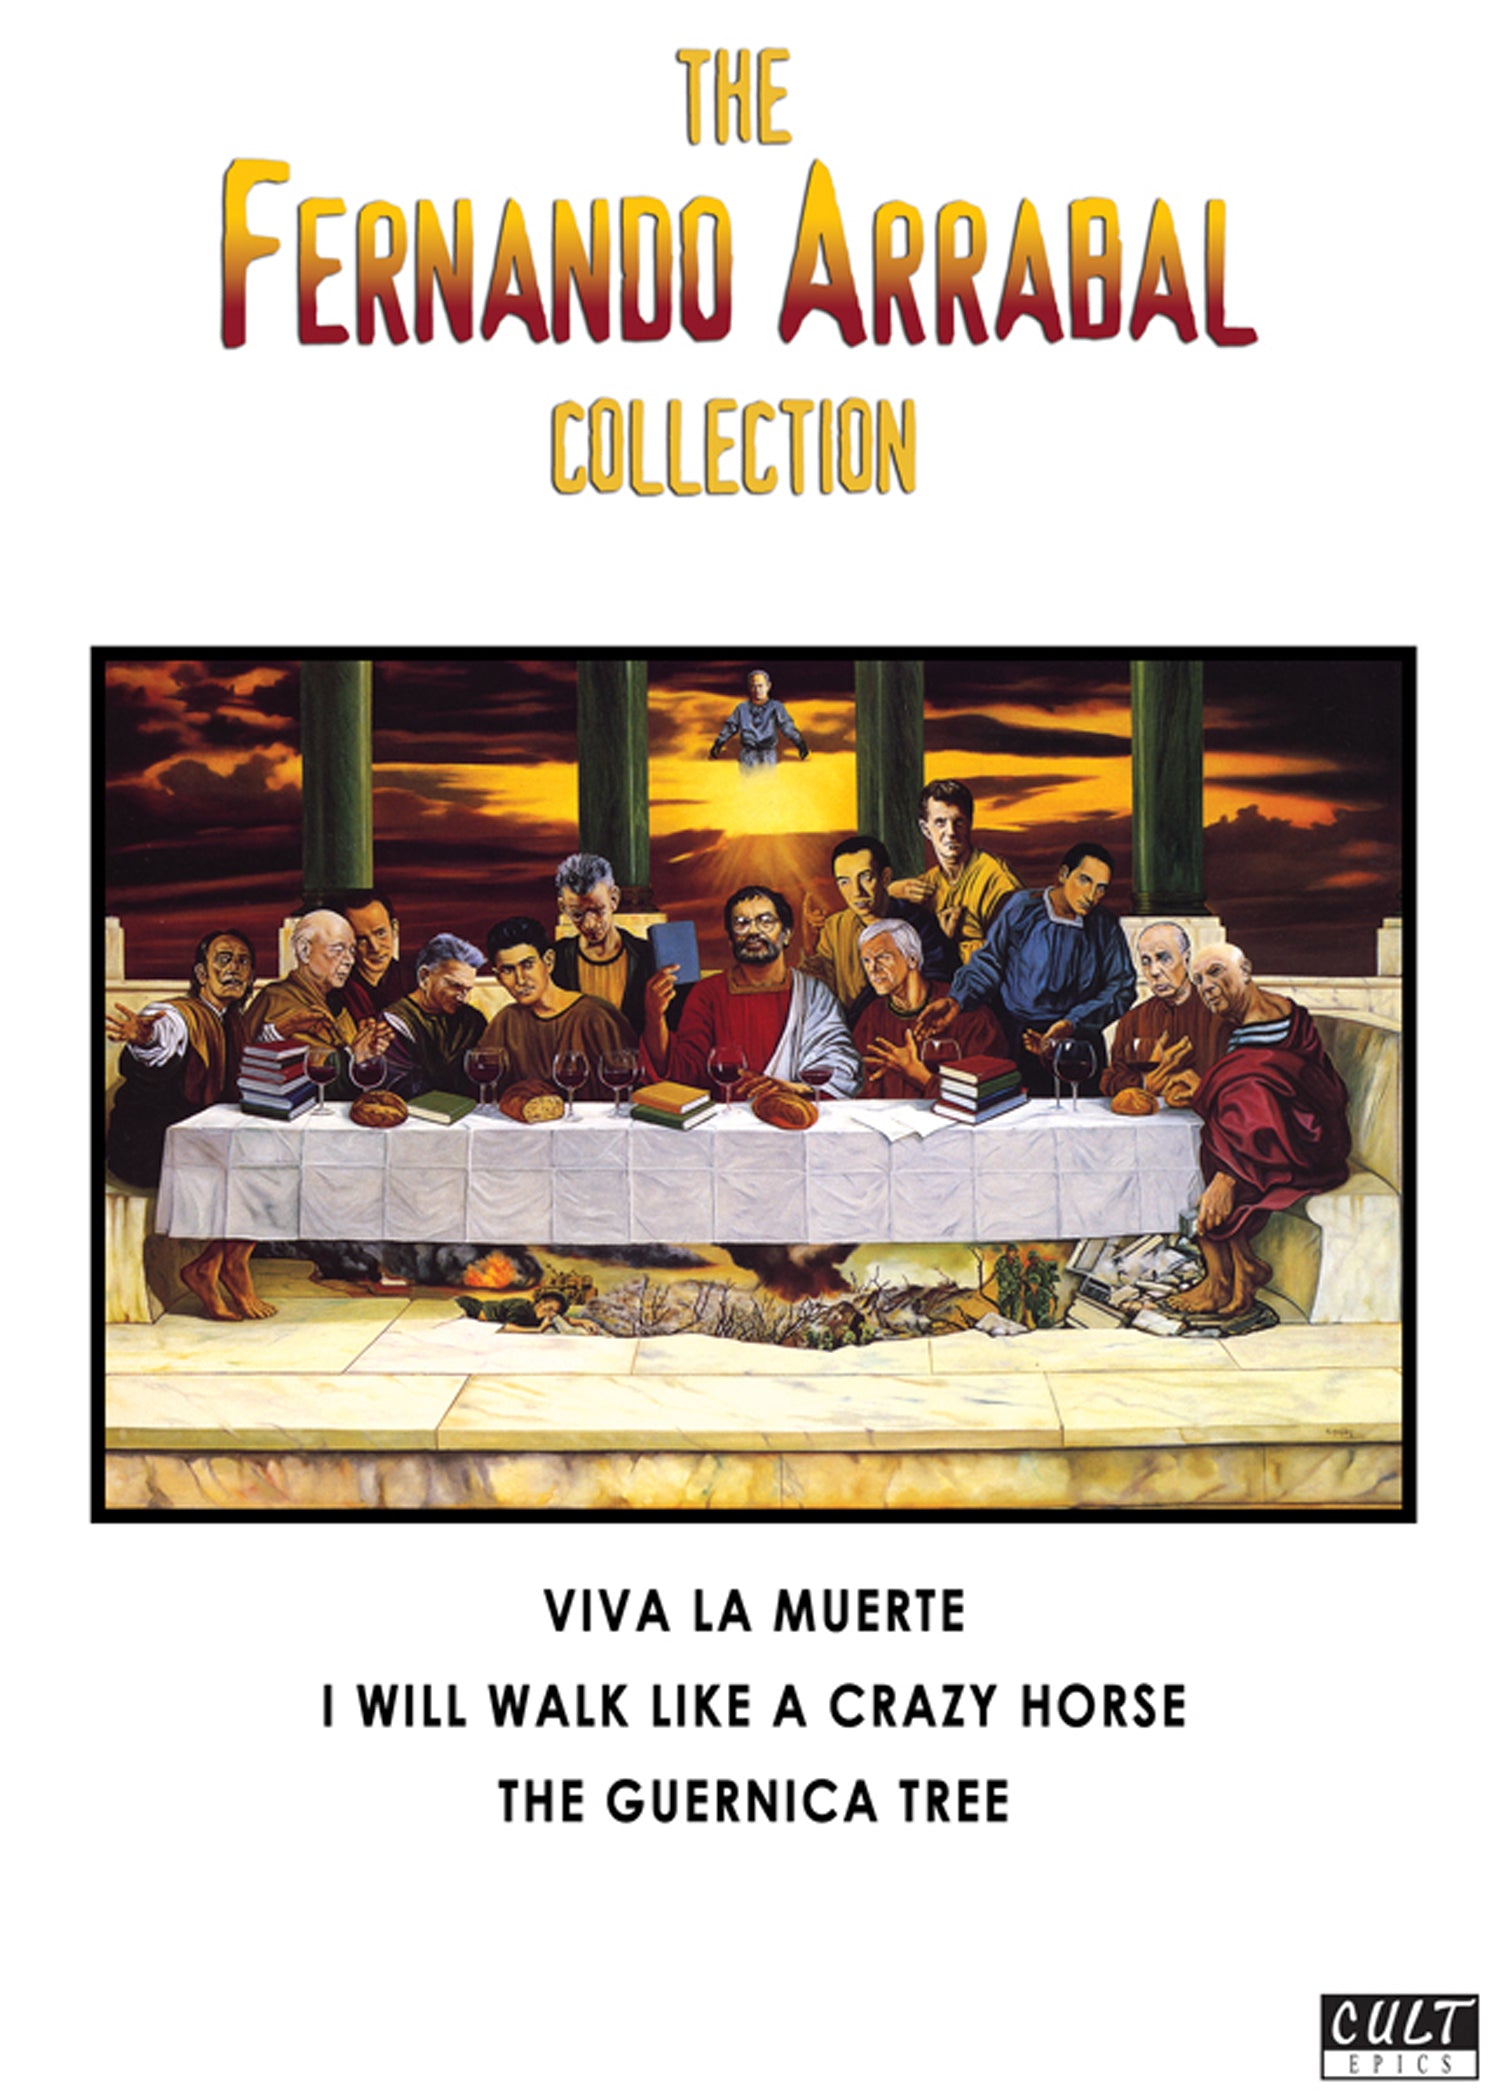 THE FERNANDO ARRABAL COLLECTION (LIMITED EDITION) DVD